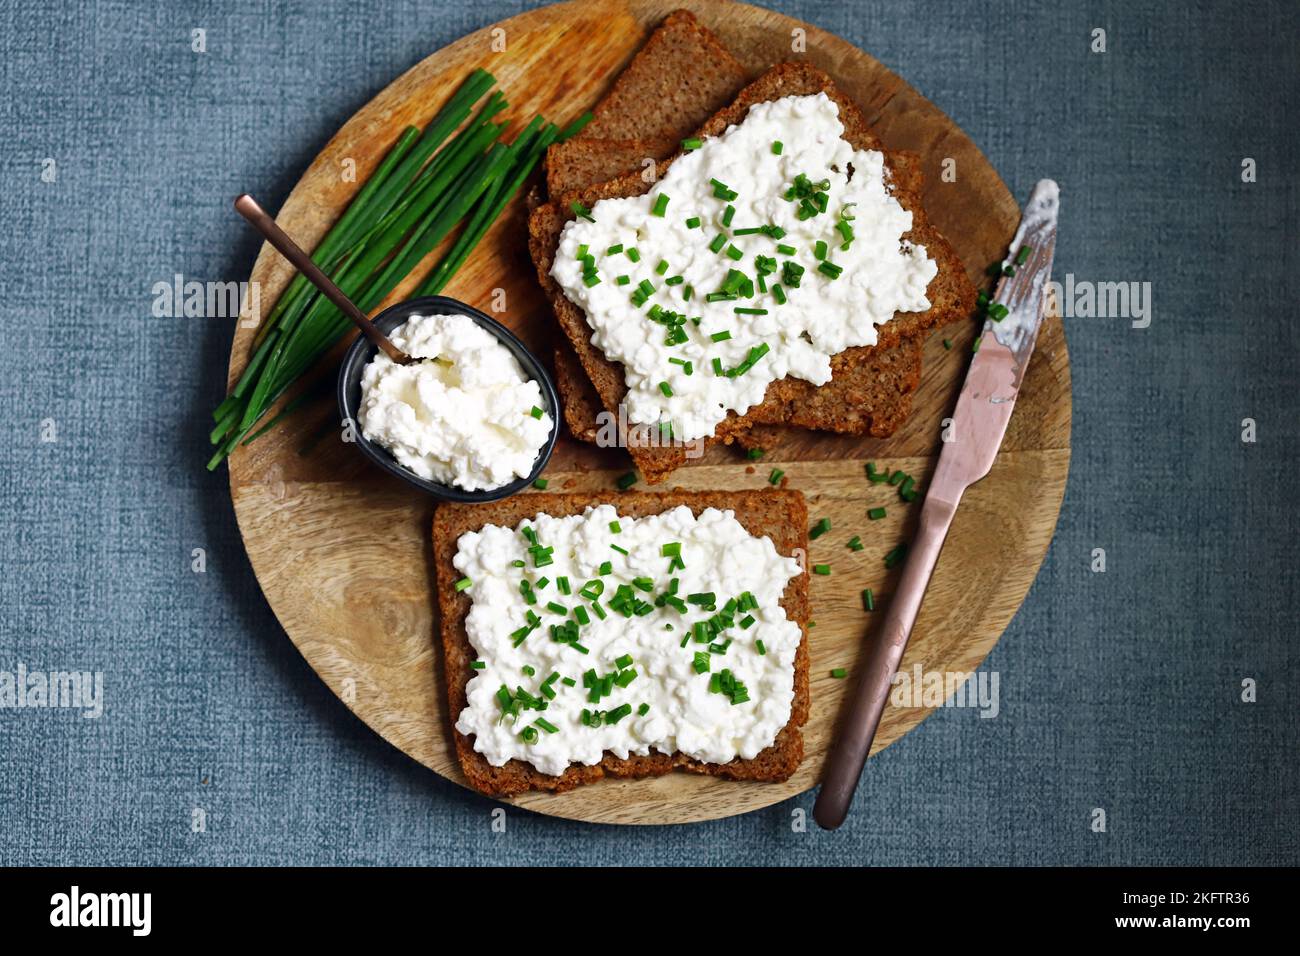 Open sandwiches with rye bread and white cottage cheese with green onions. Healthy breakfast or snack. Stock Photo